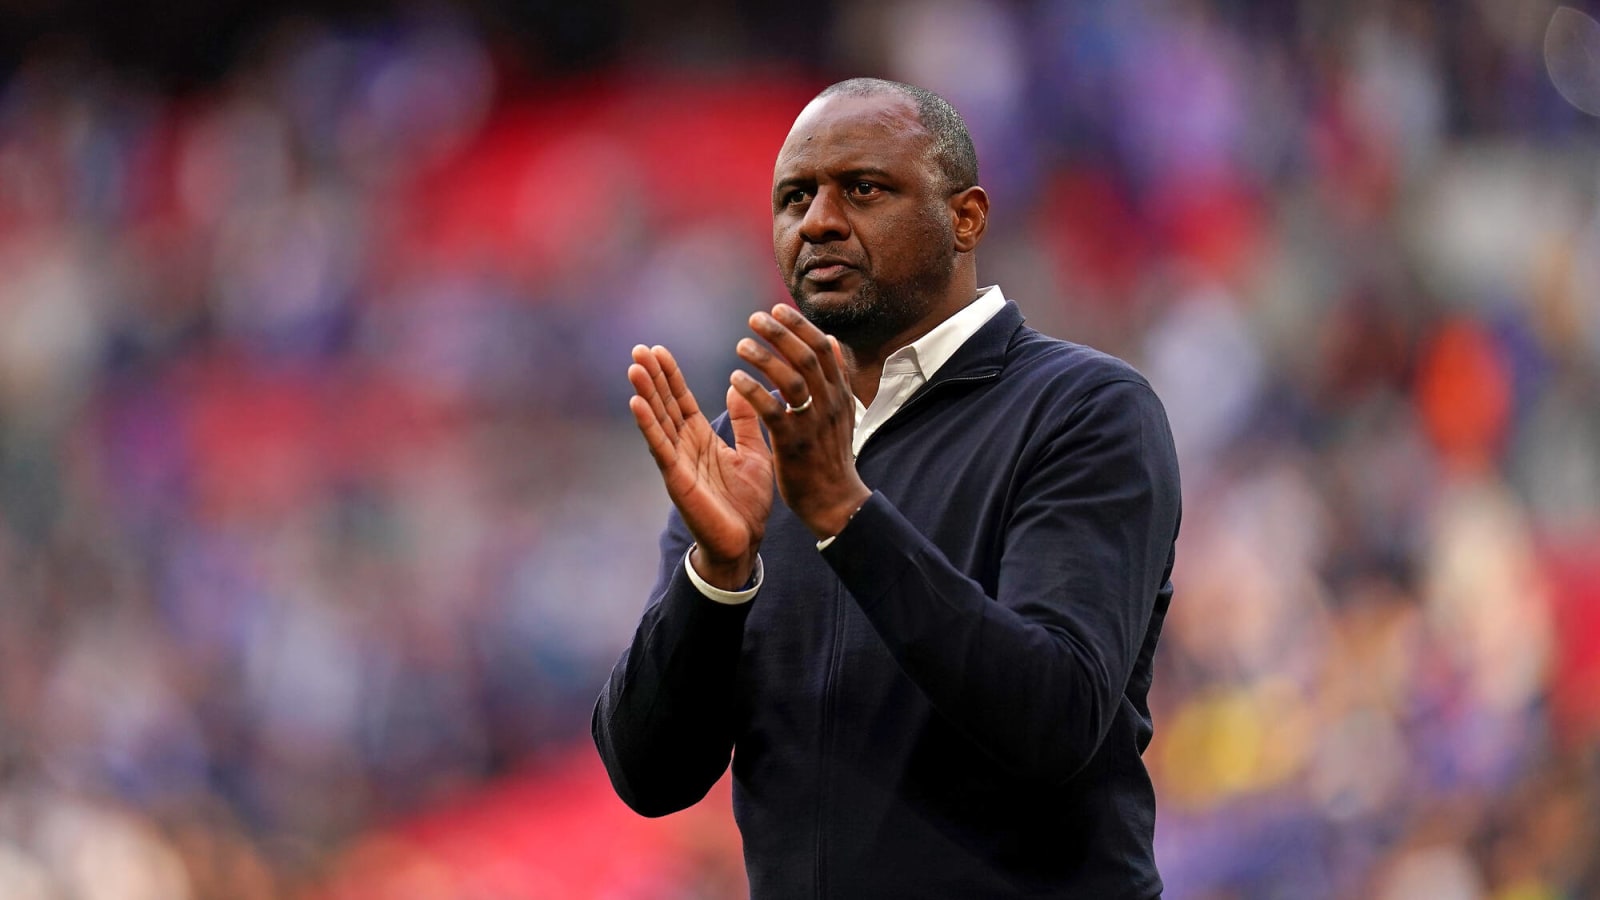 Arsenal need to listen to Patrick Vieira’s advice and copy Guardiola’s blueprint for success